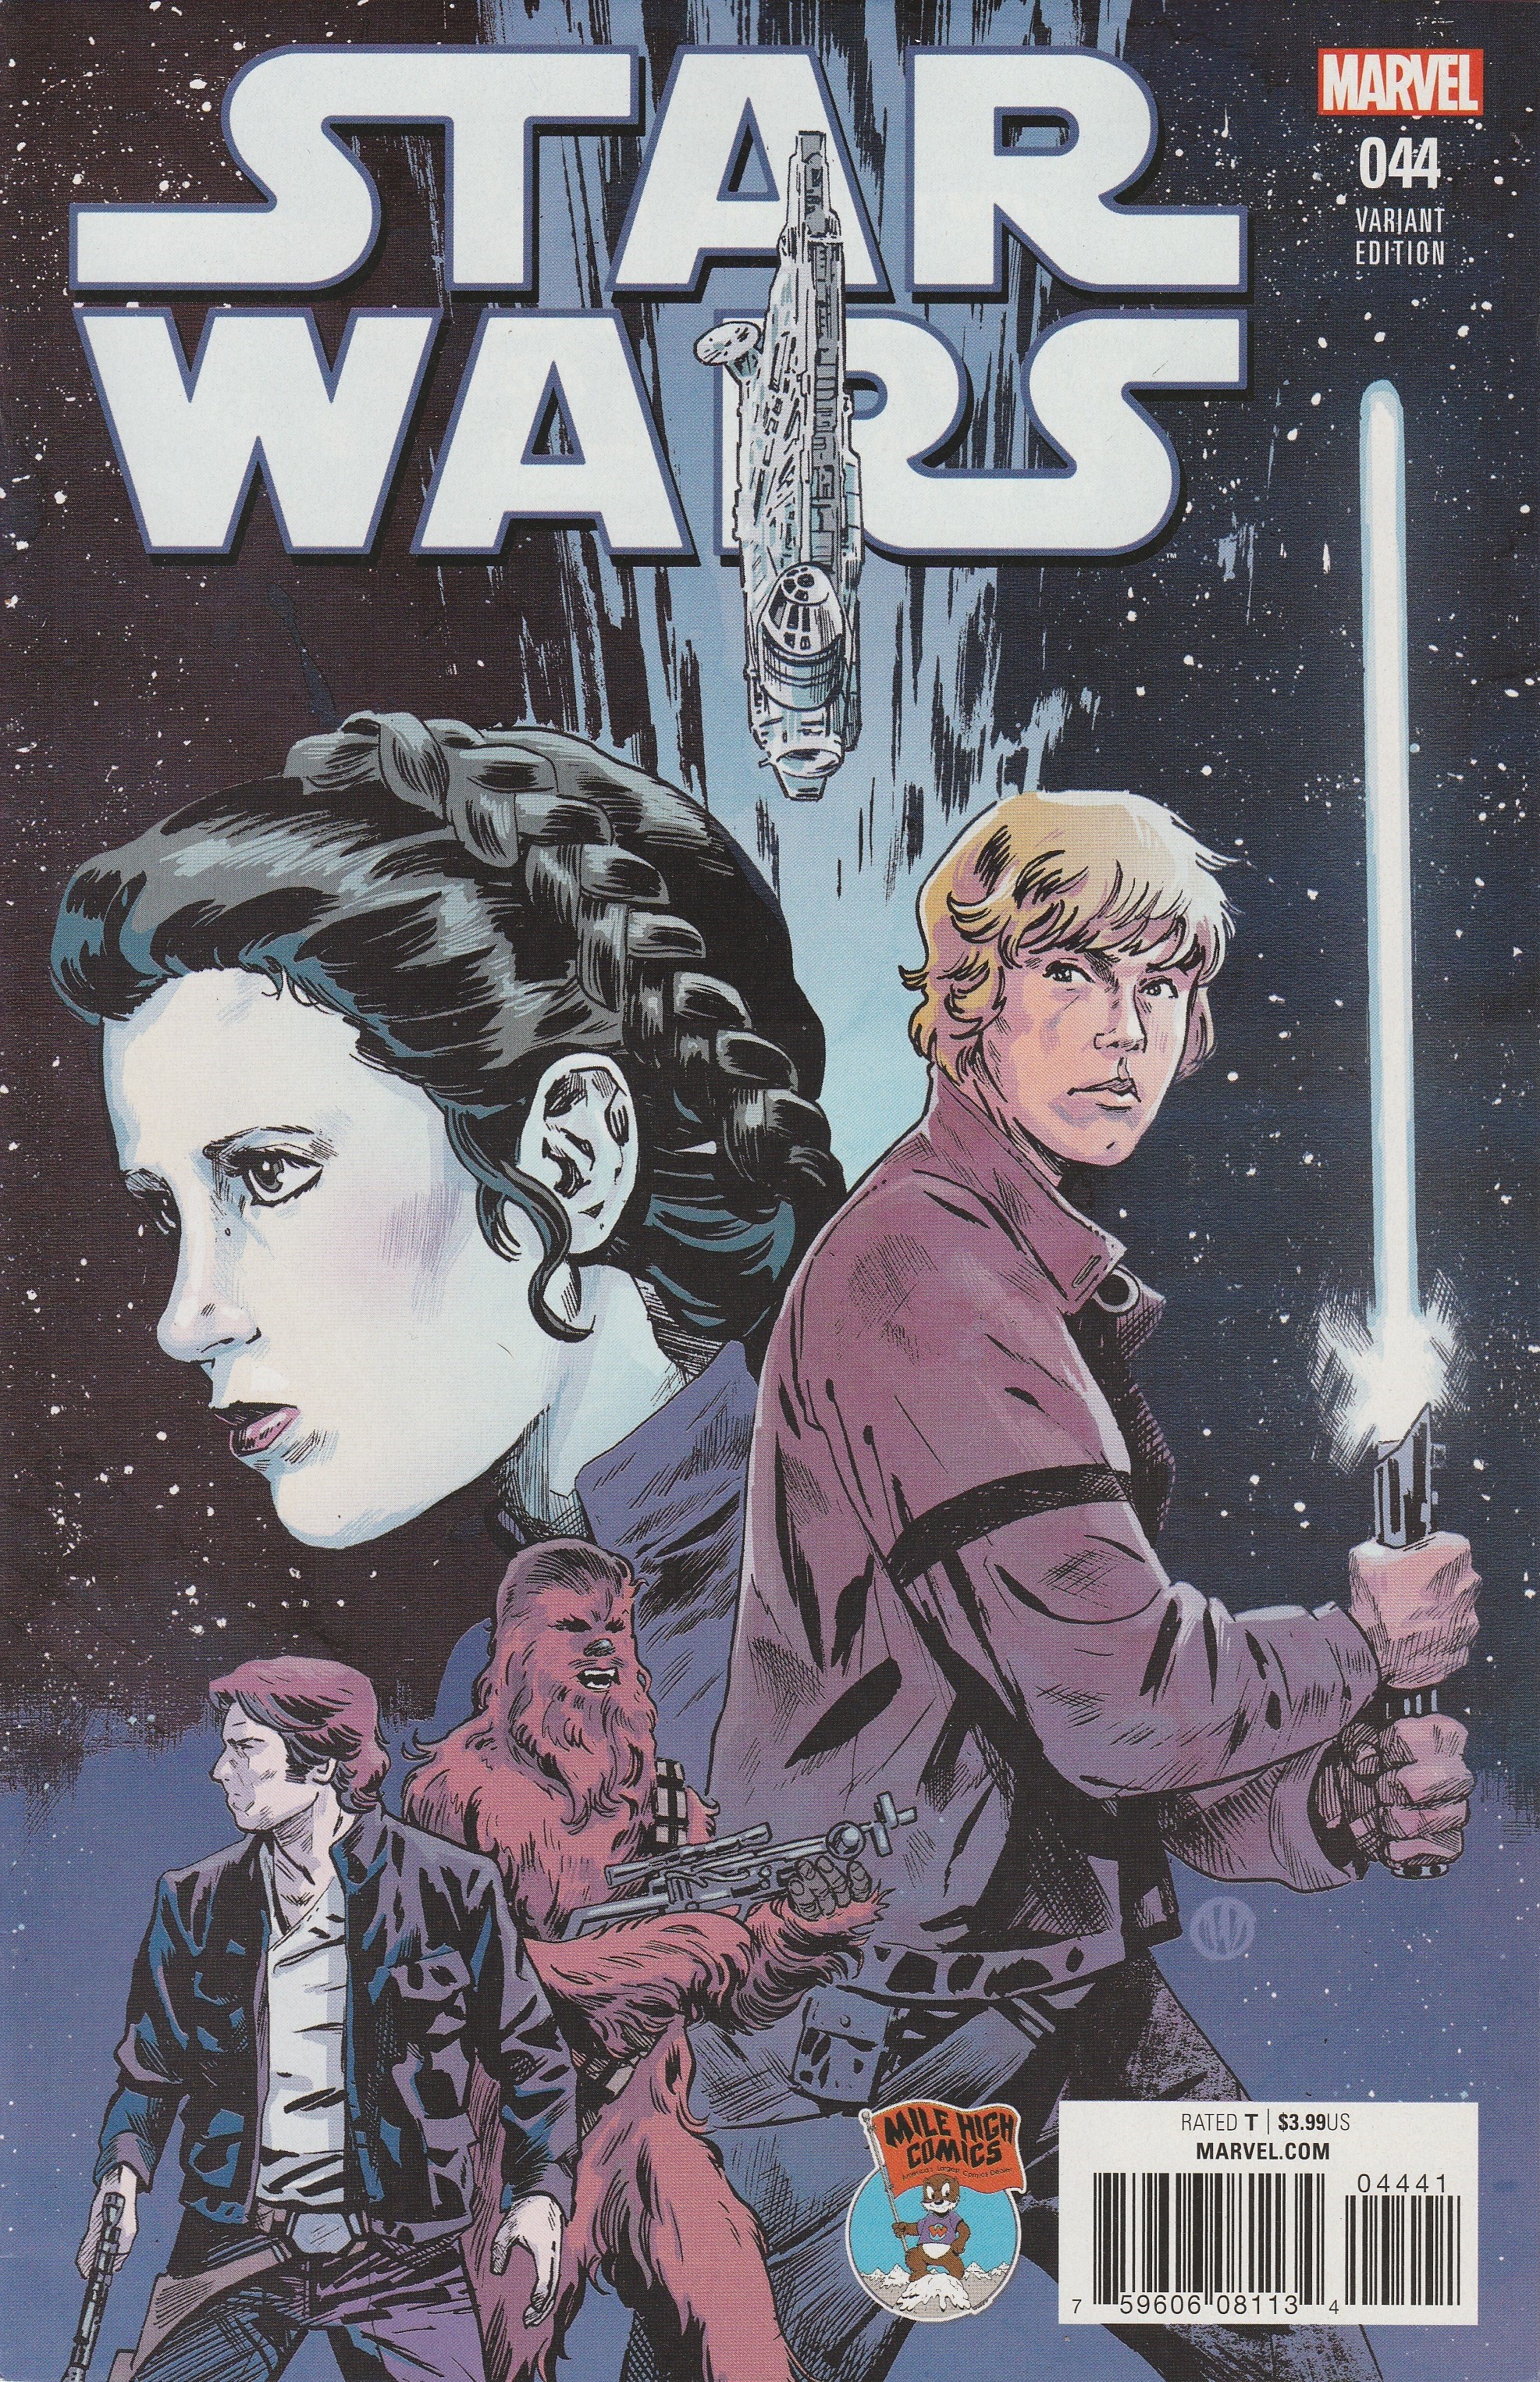 Star Wars #44 (Michael Walsh Mile High Comics Variant Cover) (07.03.2018)